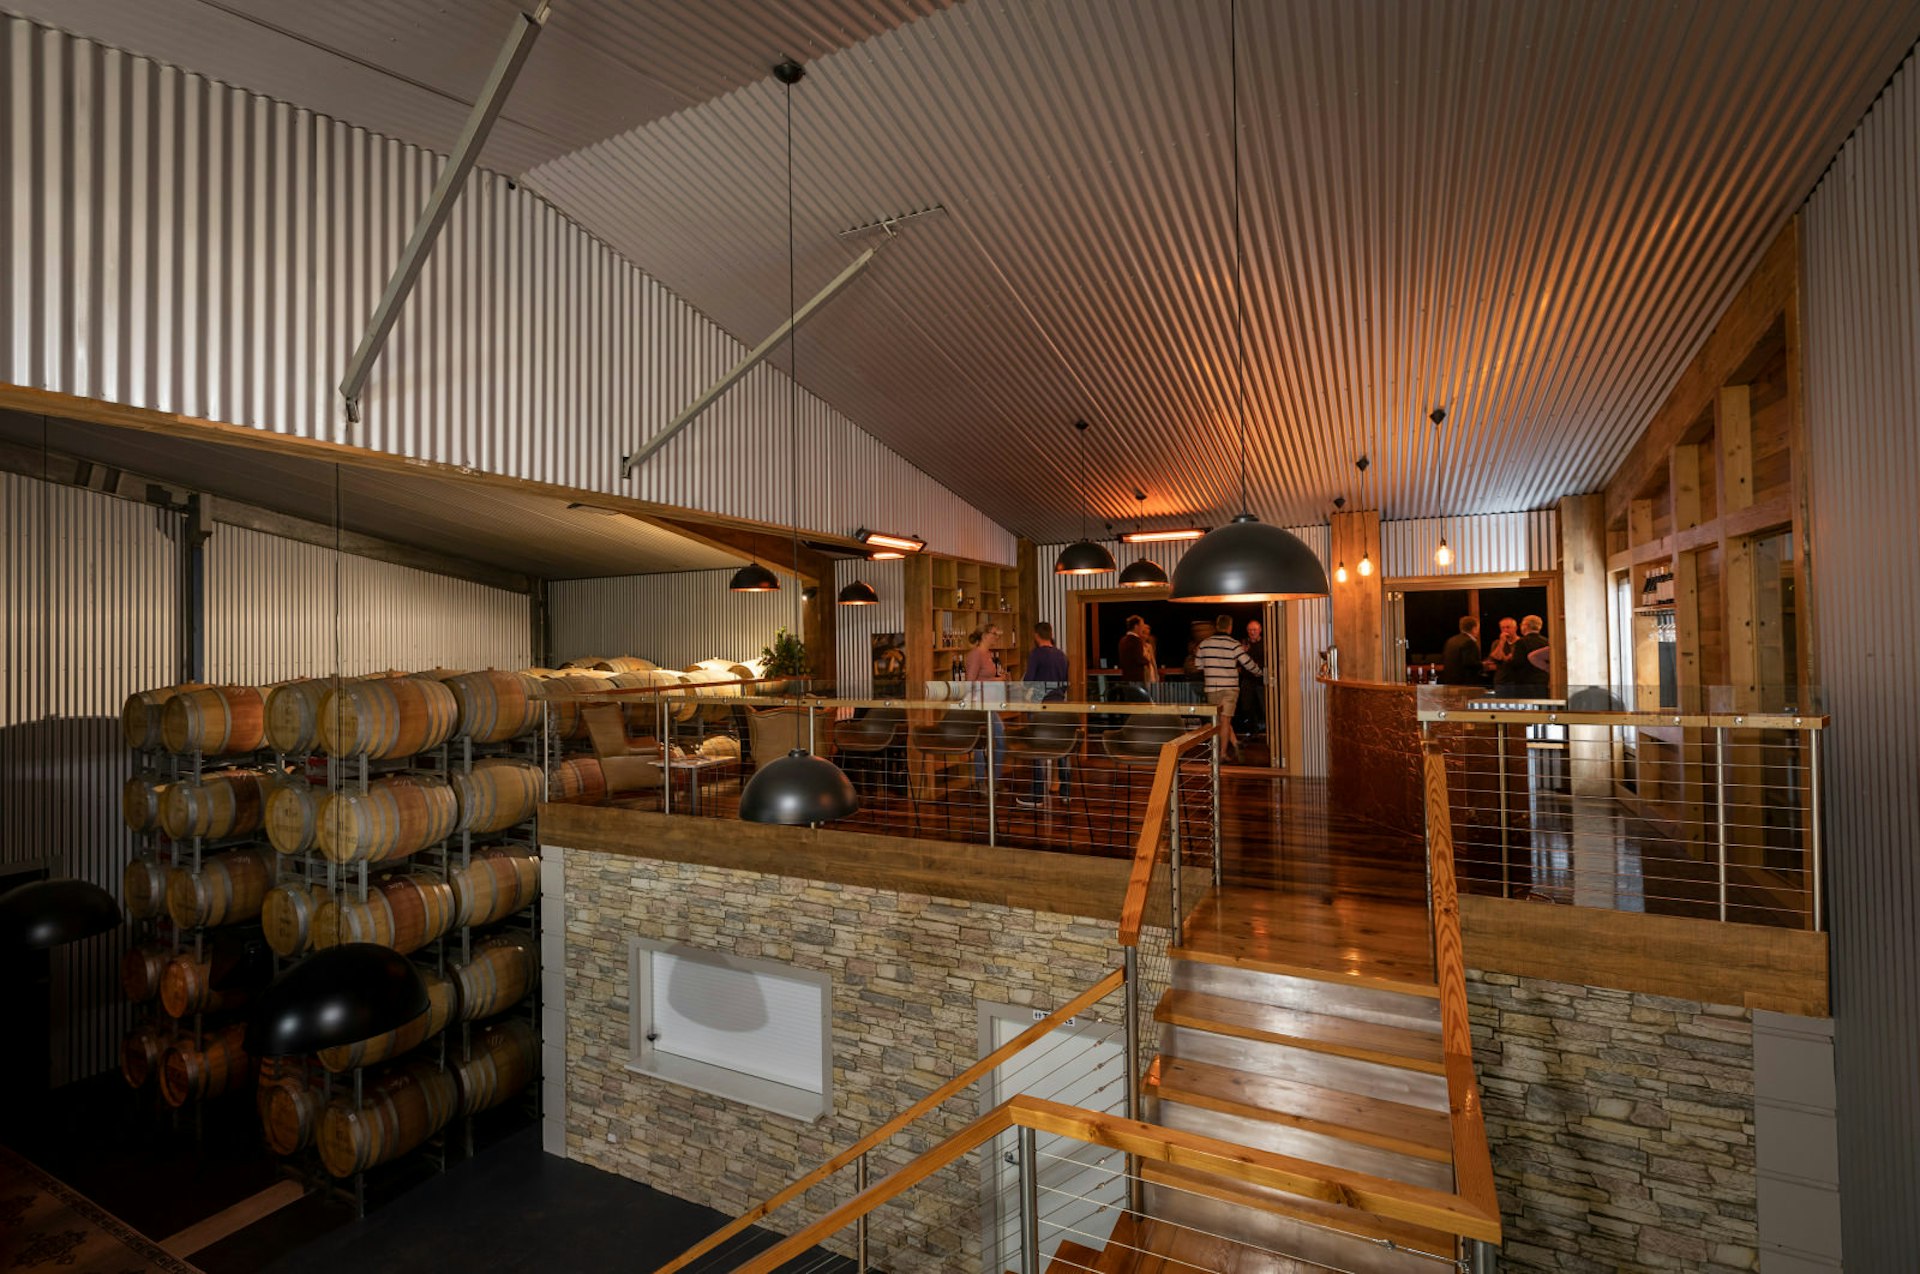 The warehouse-like interior of Aztes Corner Wines in Barossa Valley. Casks of wine are stacked on the left with a small bar on the right.